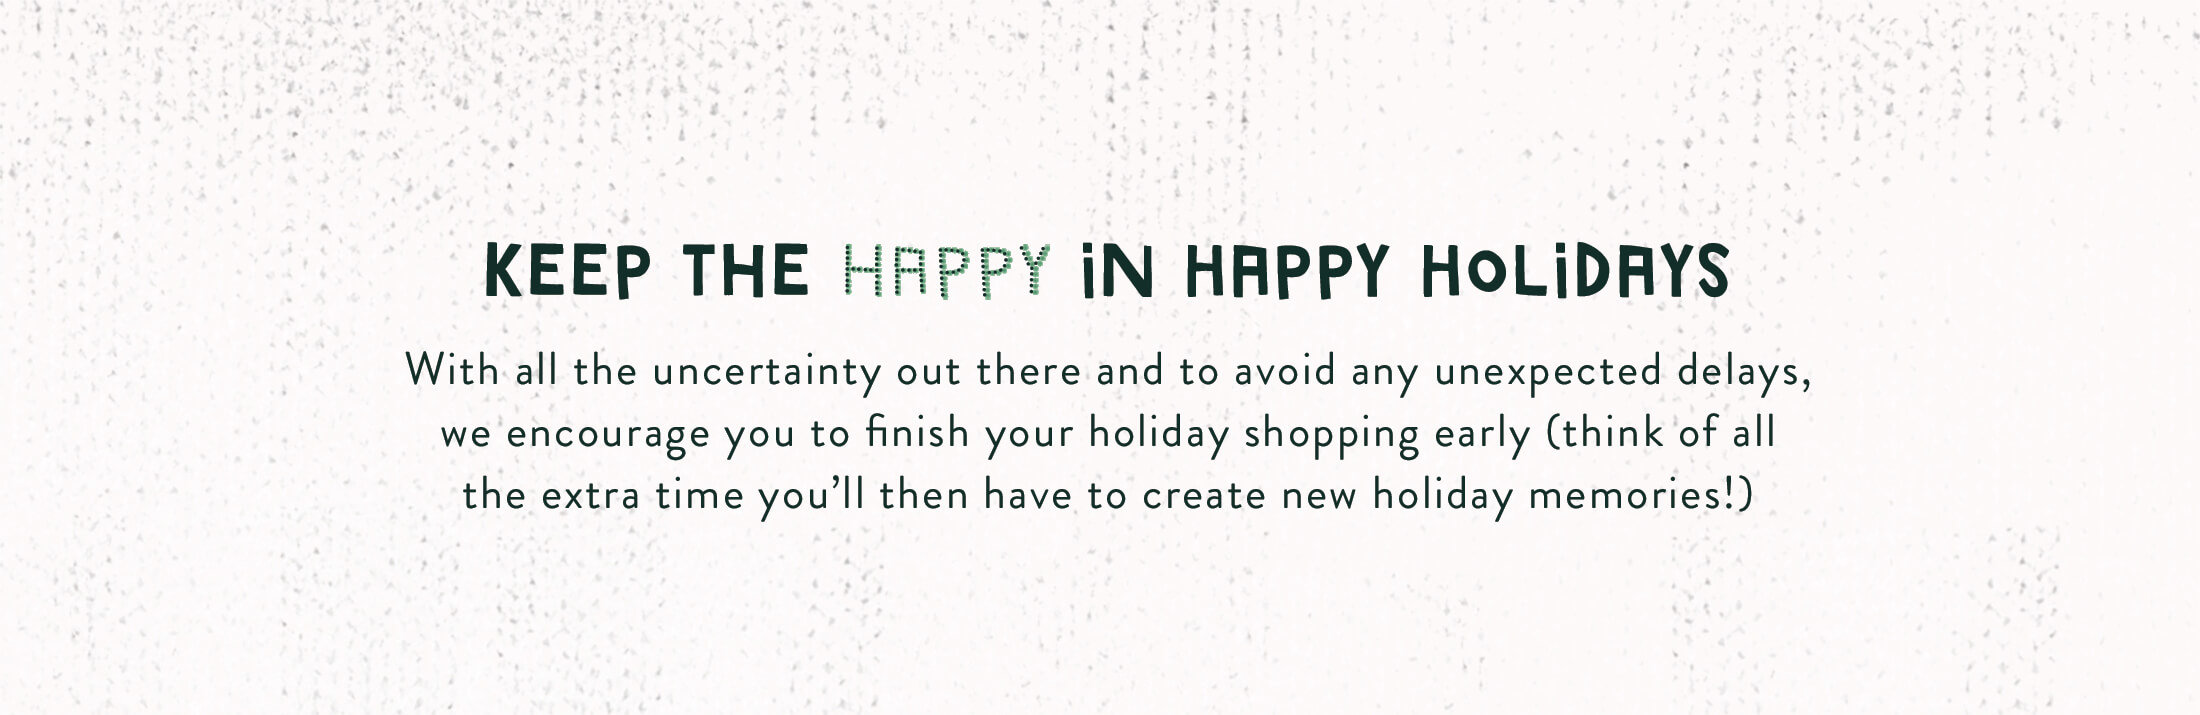 Keep the happy in happy holidays